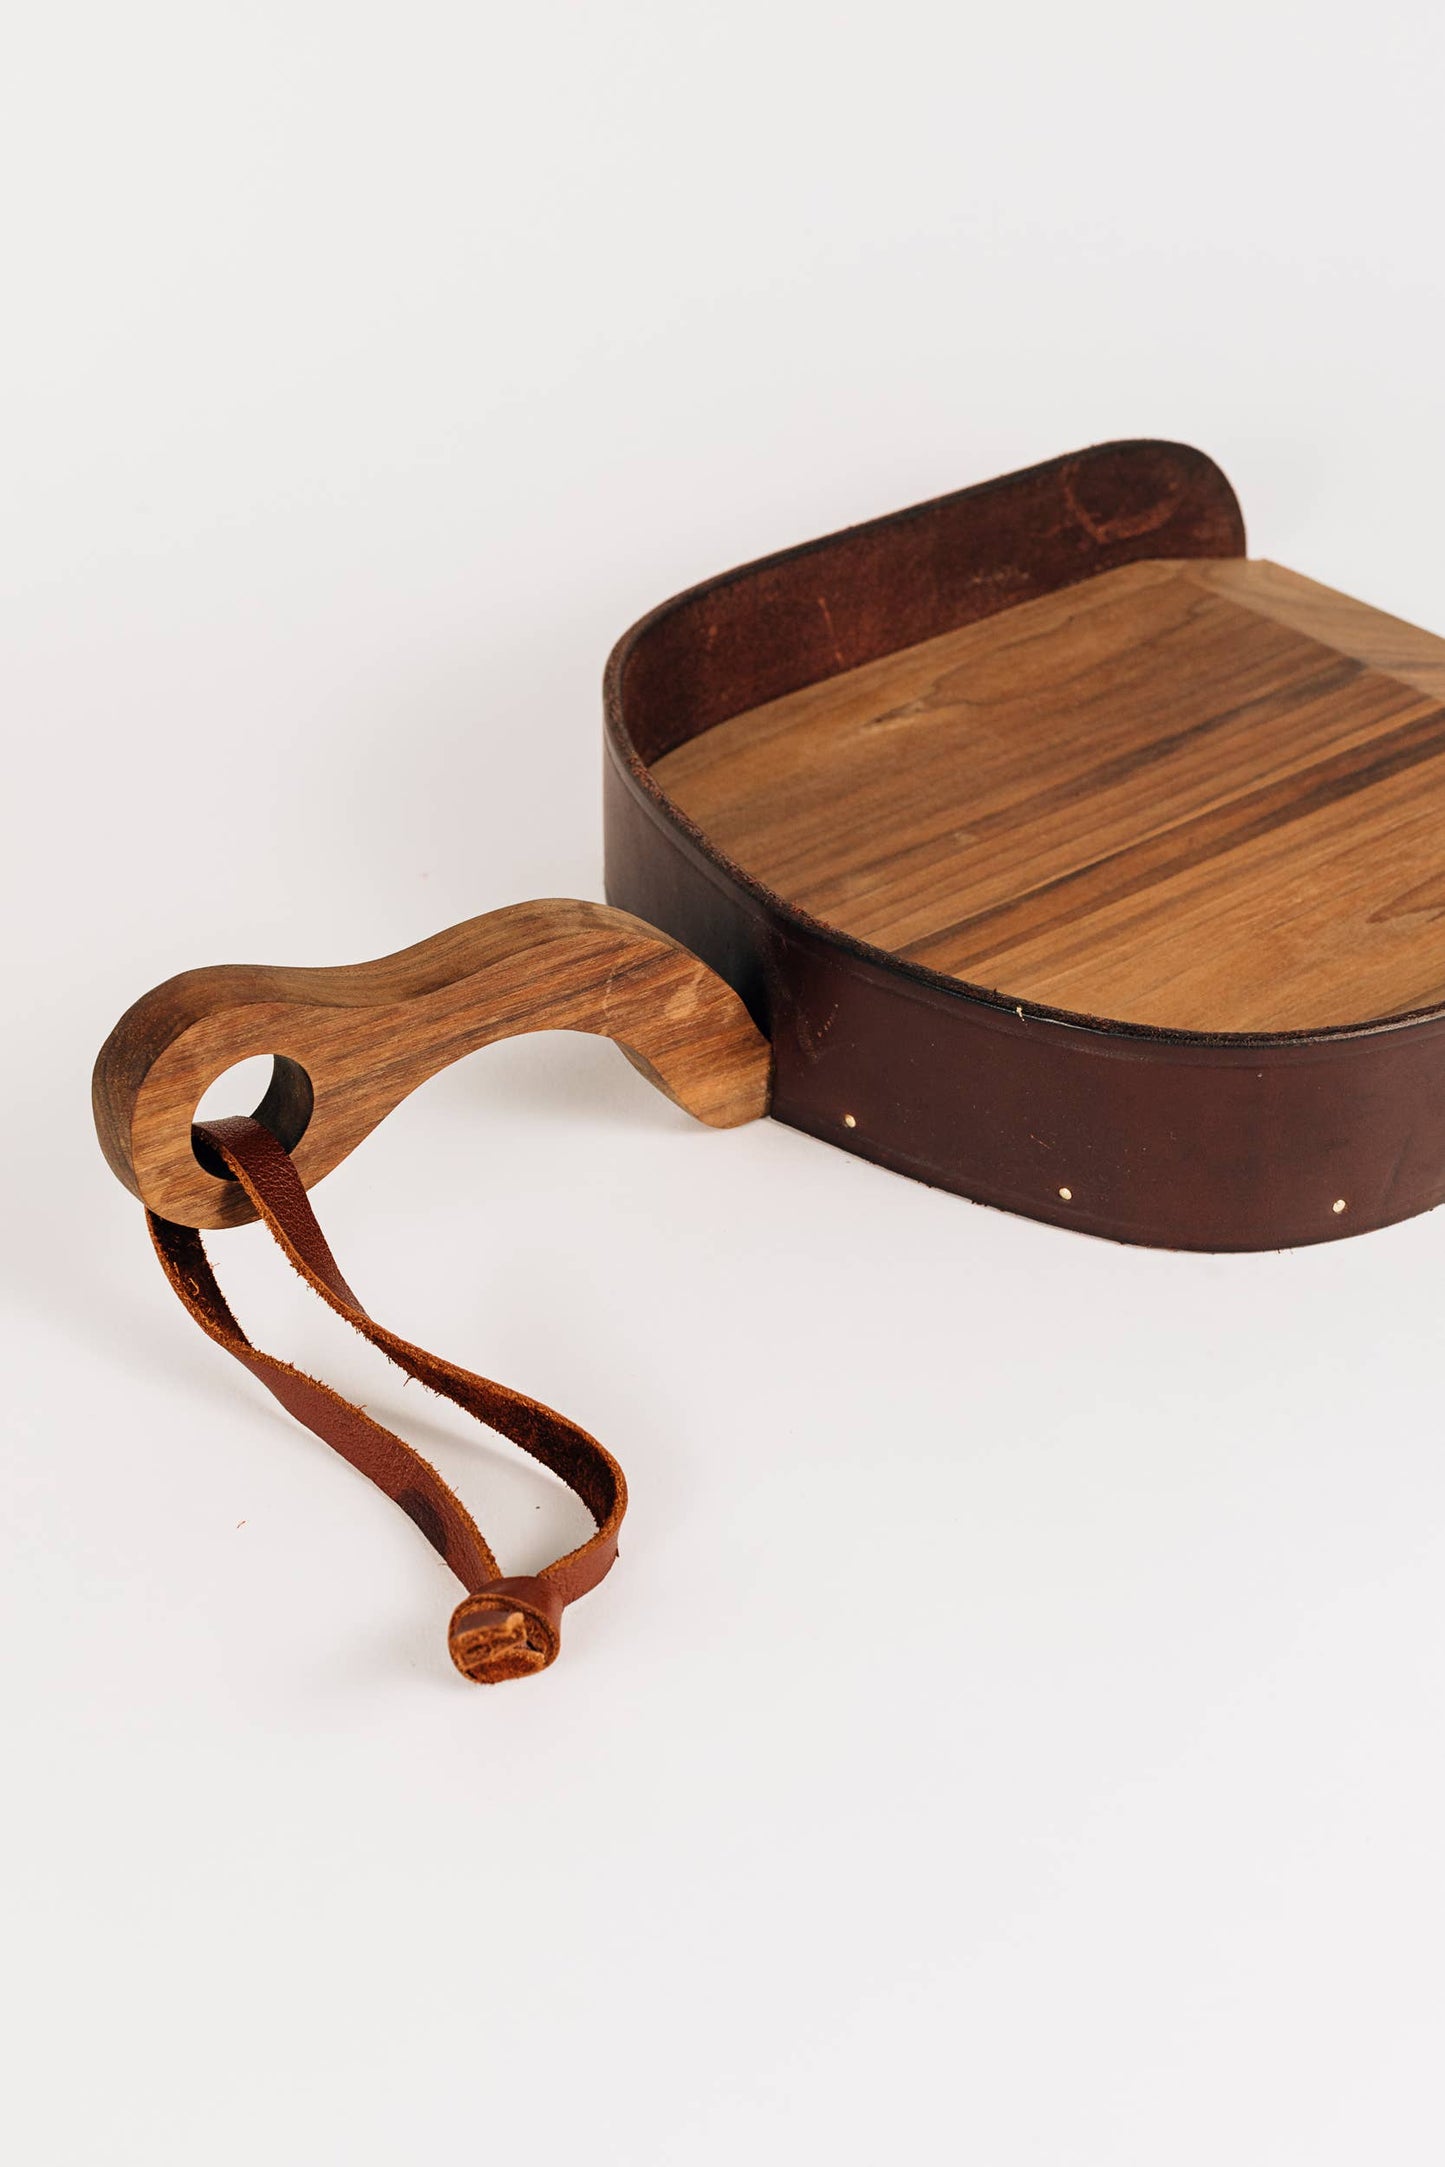 The Wood and Leather Dustpan by Millstream Home